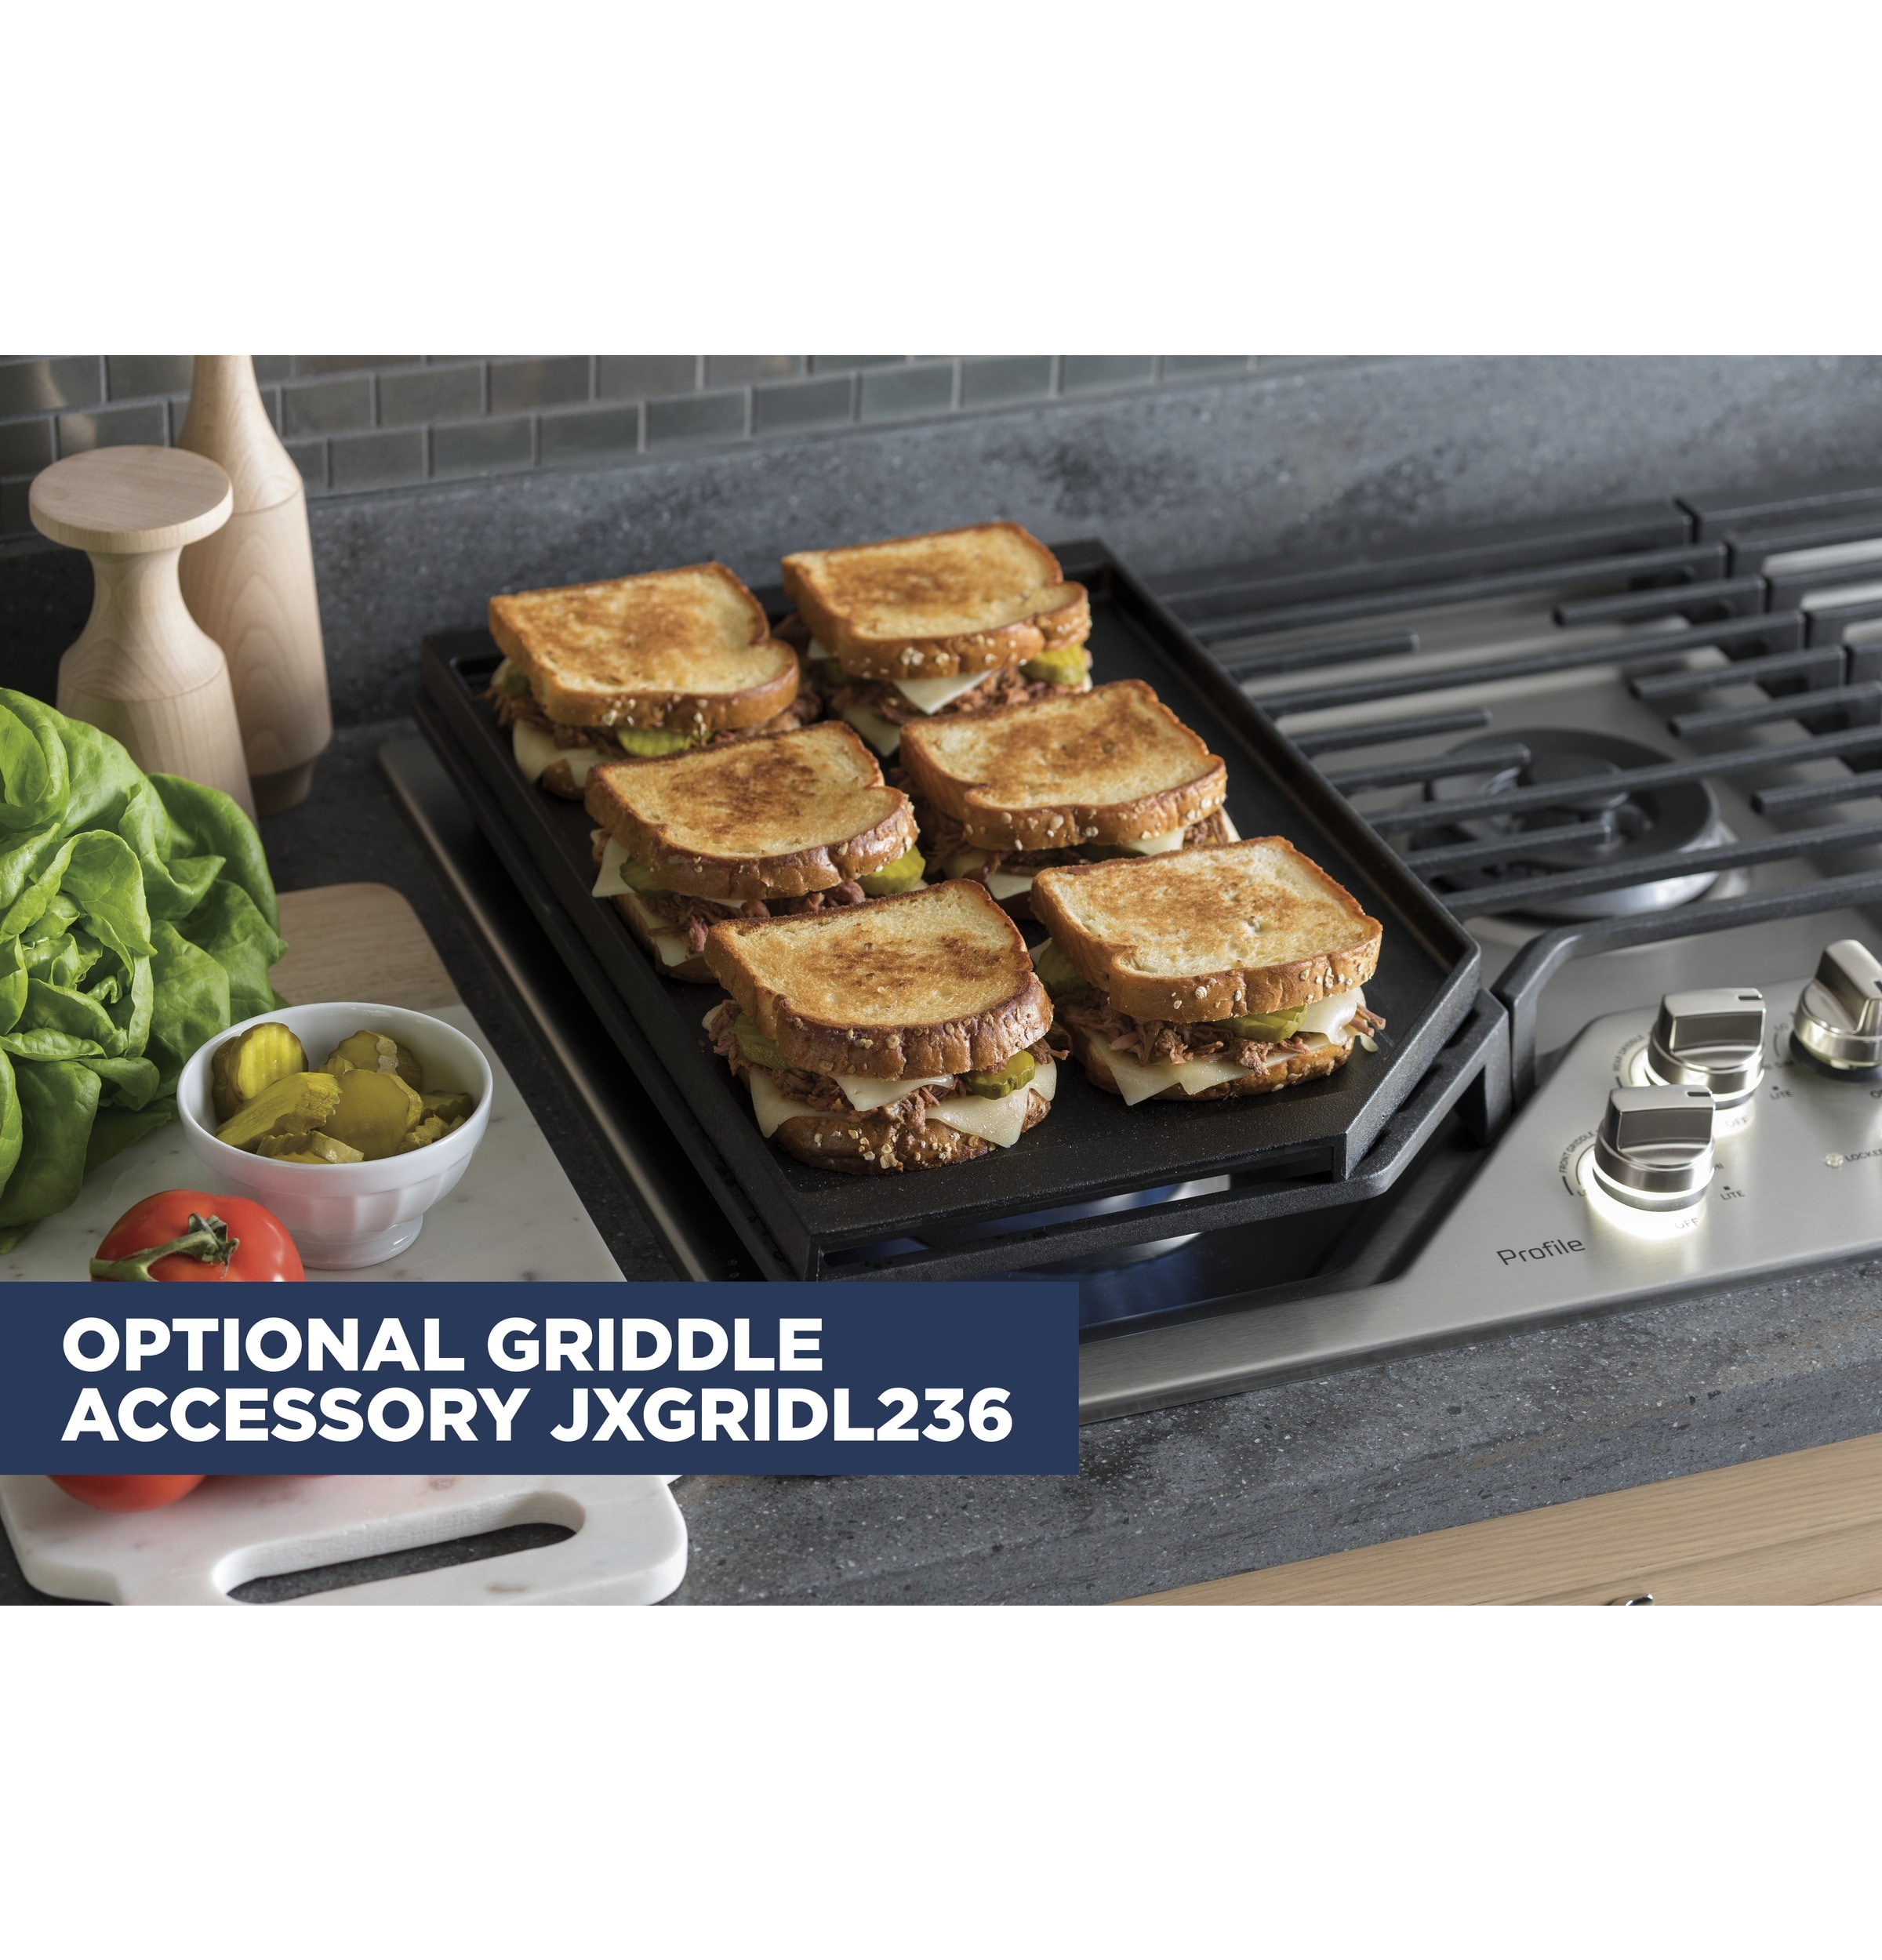 GE Cast Iron 36 in. Cooktop Griddle JXGRIDL236 - The Home Depot